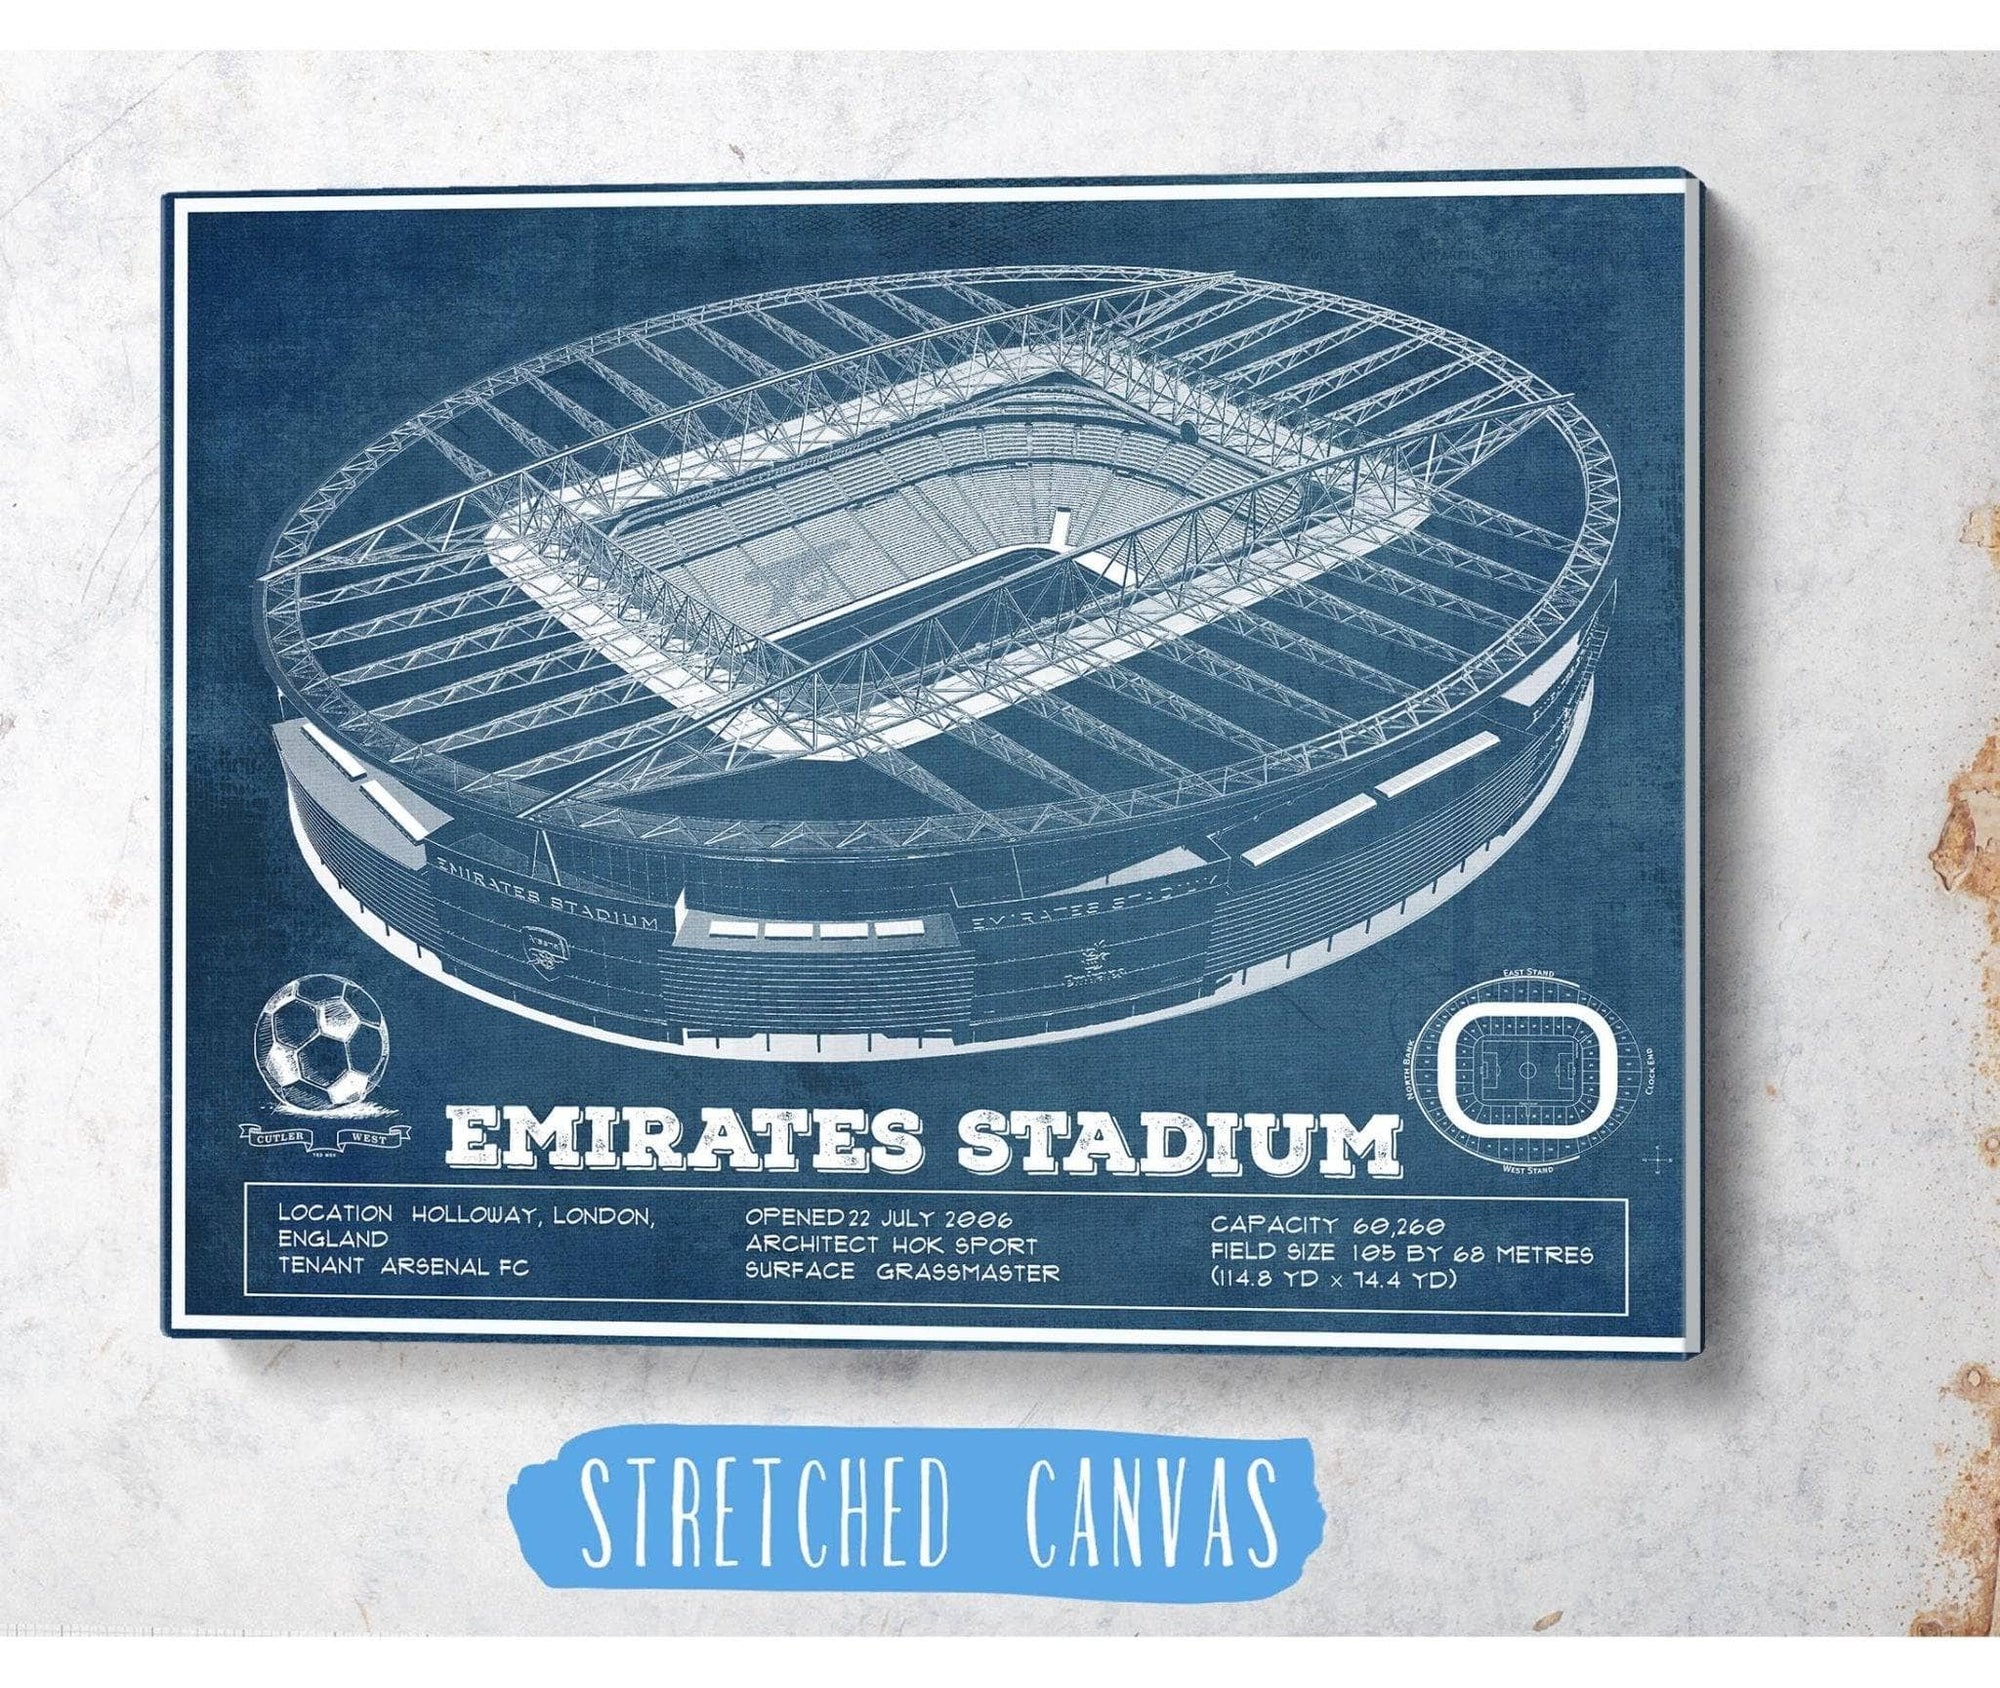 Cutler West Soccer Collection Arsenal Football Club - Emirates Stadium Soccer Print